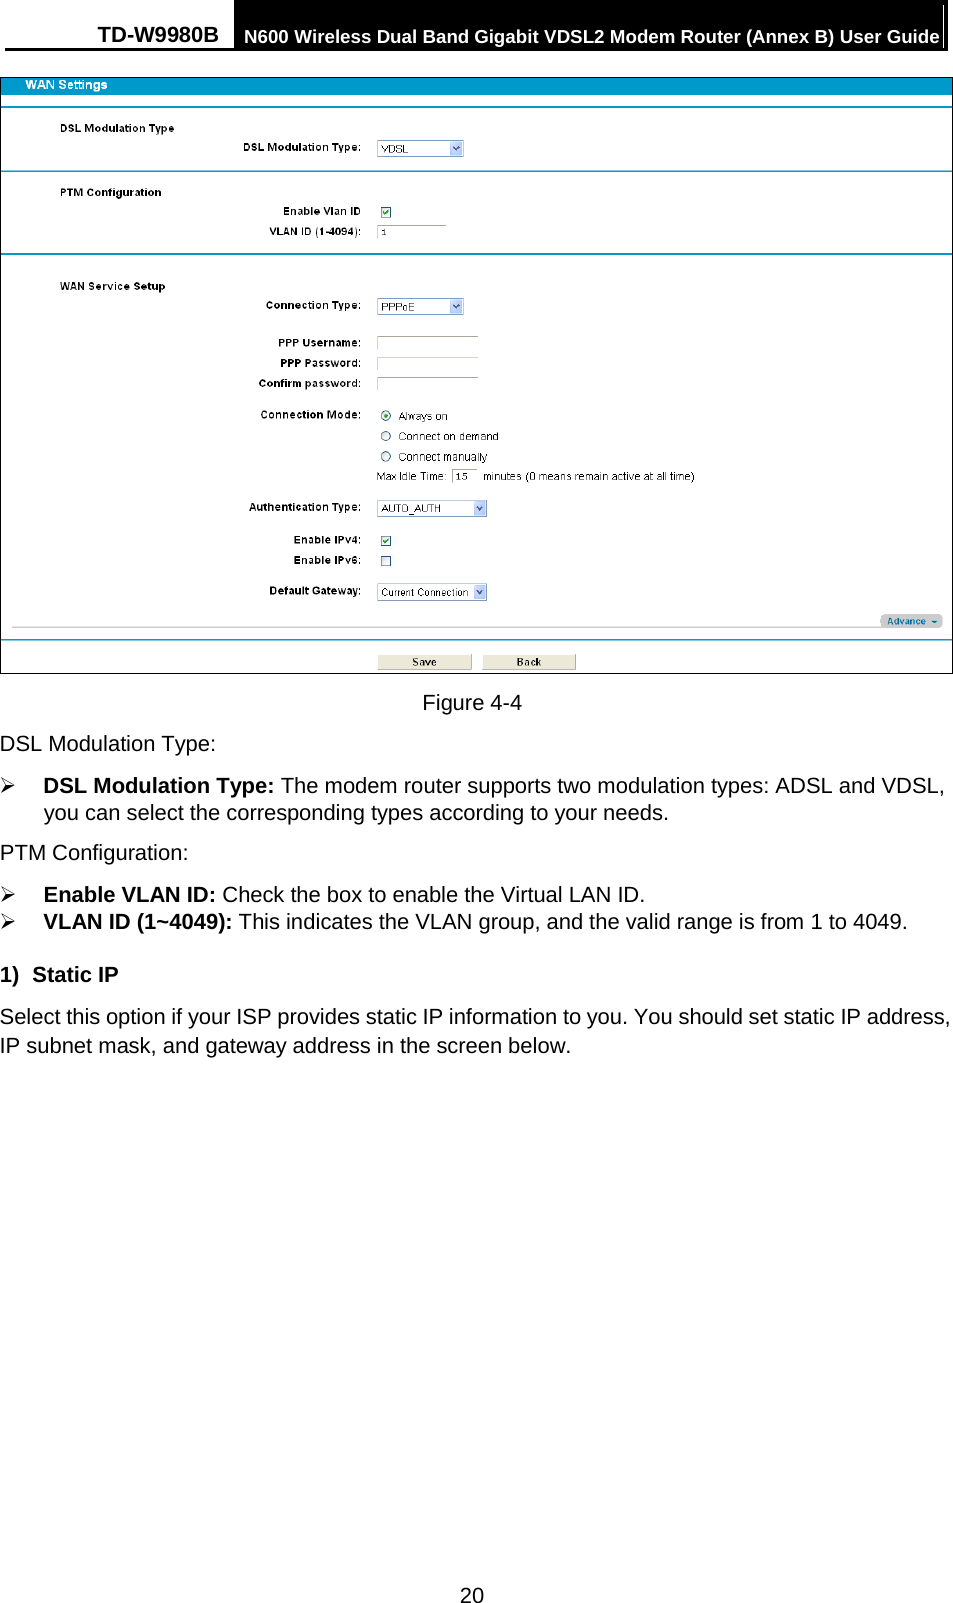 TD-W9980B N600 Wireless Dual Band Gigabit VDSL2 Modem Router (Annex B) User Guide   Figure 4-4 DSL Modulation Type:  DSL Modulation Type: The modem router supports two modulation types: ADSL and VDSL, you can select the corresponding types according to your needs. PTM Configuration:  Enable VLAN ID: Check the box to enable the Virtual LAN ID.  VLAN ID (1~4049): This indicates the VLAN group, and the valid range is from 1 to 4049.   1)  Static IP Select this option if your ISP provides static IP information to you. You should set static IP address, IP subnet mask, and gateway address in the screen below. 20 